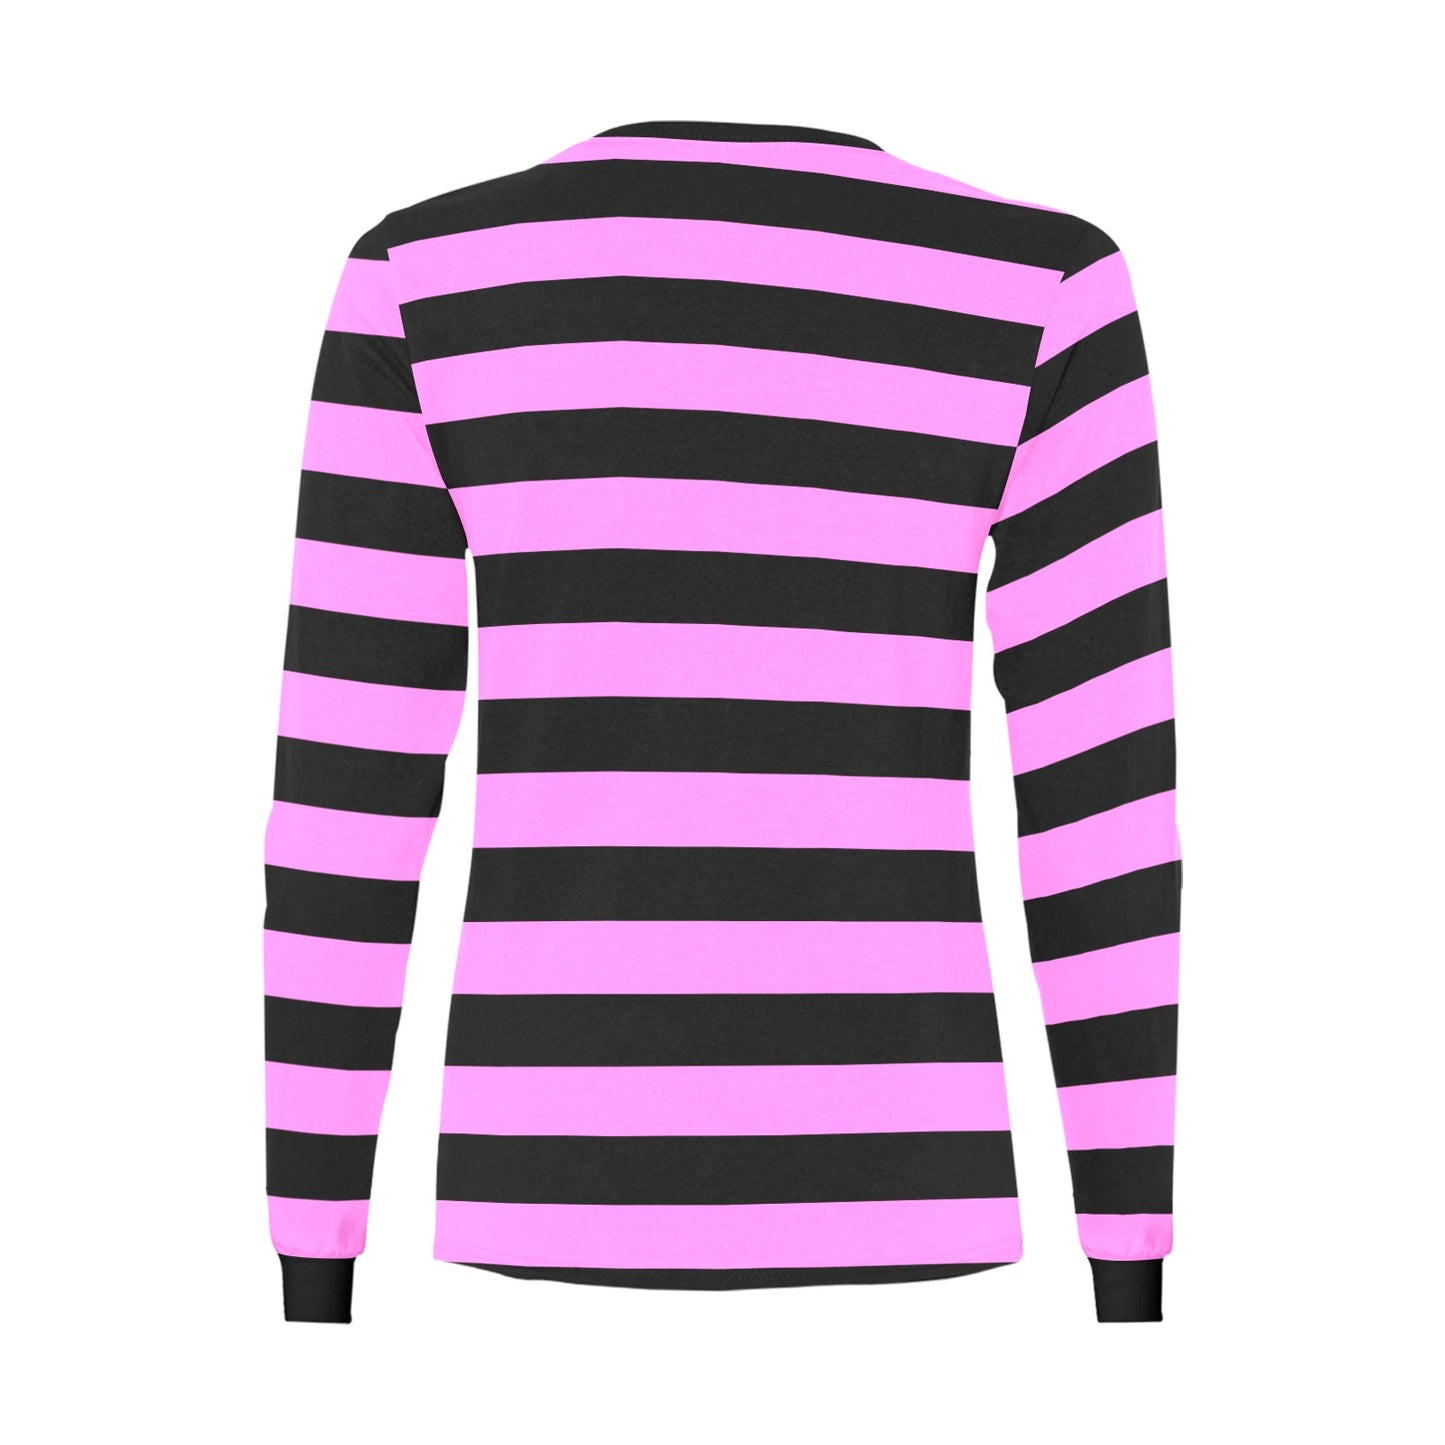 Black and Pink Striped Women Long Sleeve Tshirt, Designer Graphic Aesthetic Crew Neck Ladies Stripes Tee Shirt Top